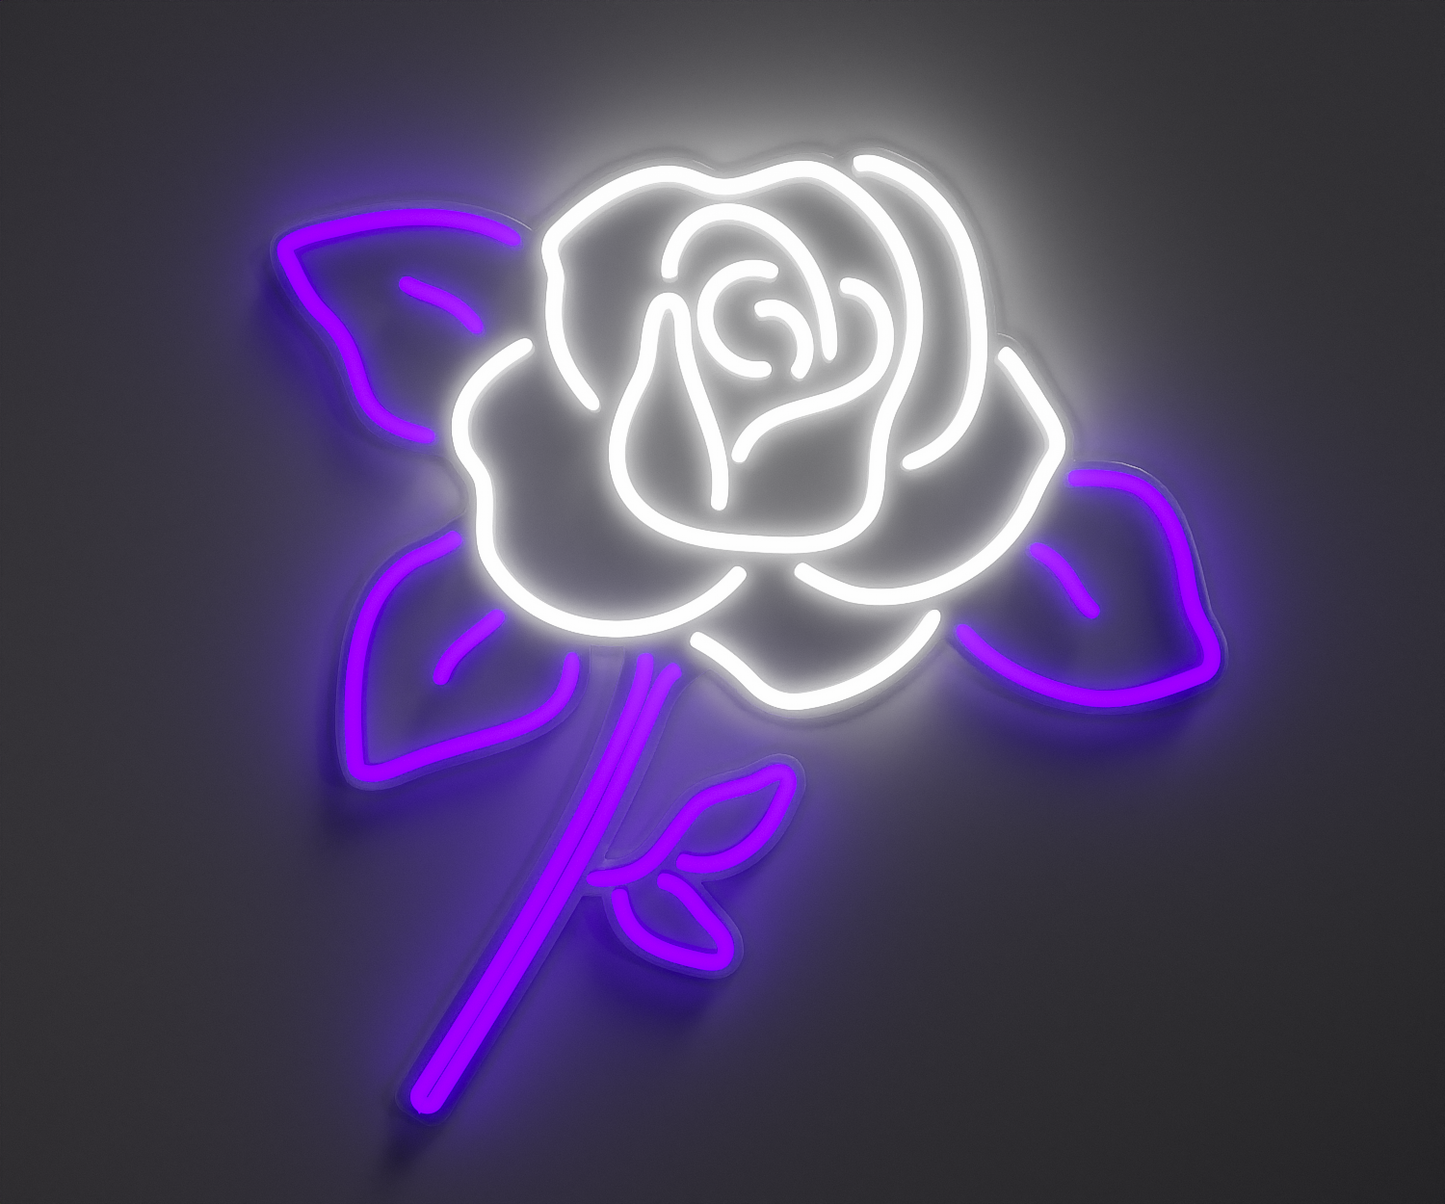 White and purple rose neon sign